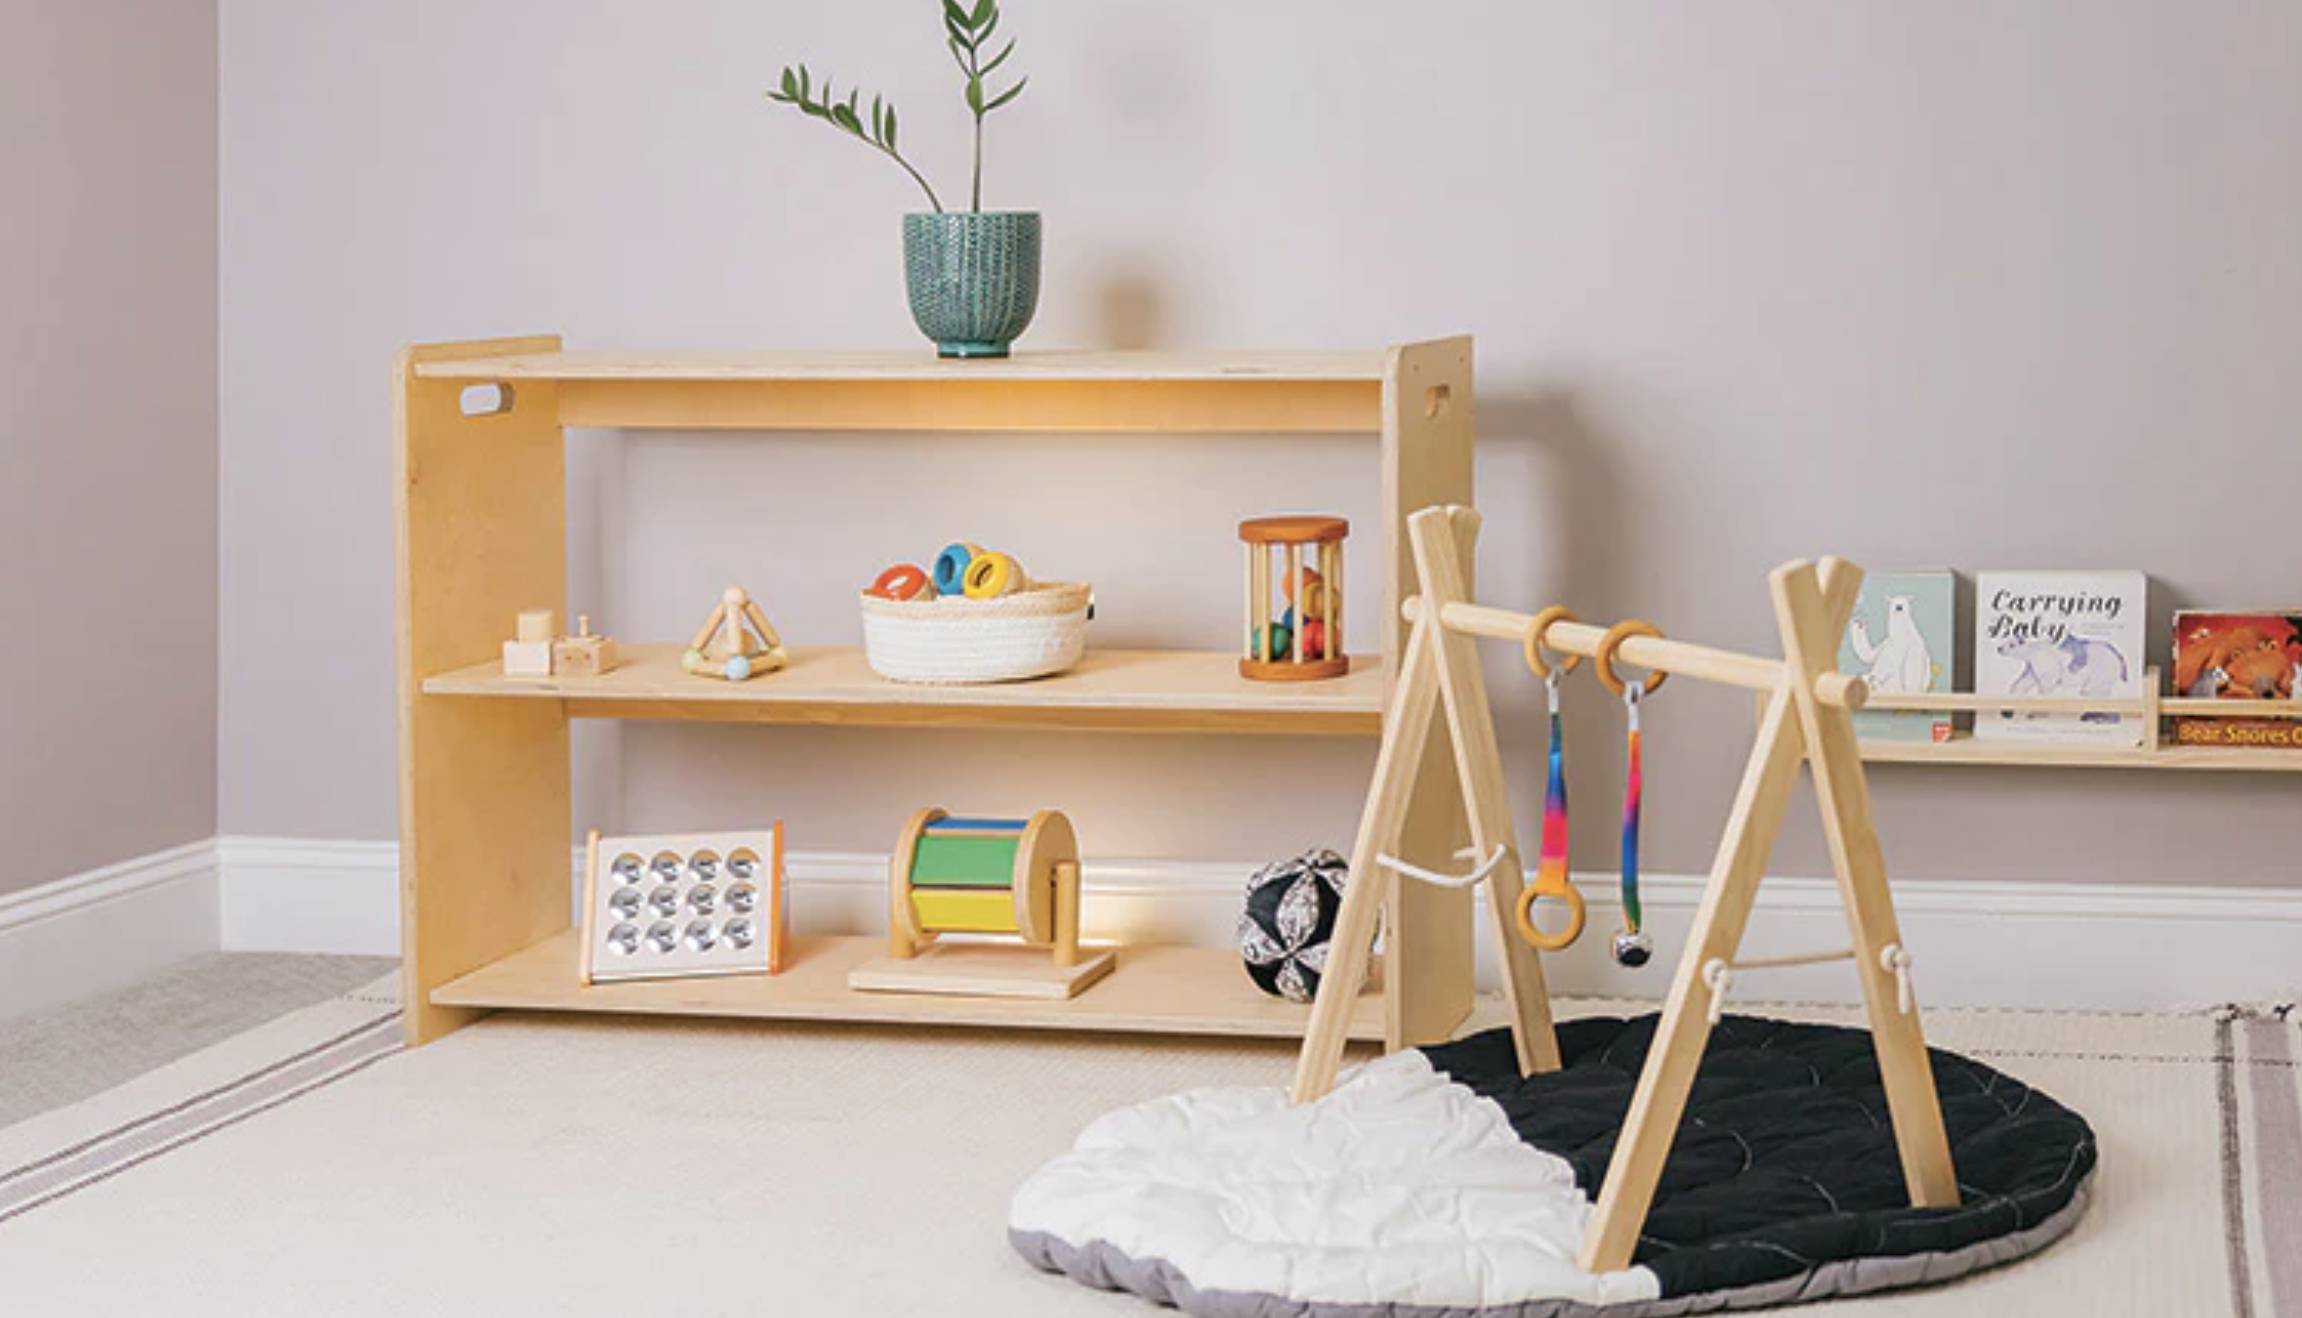 An image of a playroom with montessori toys